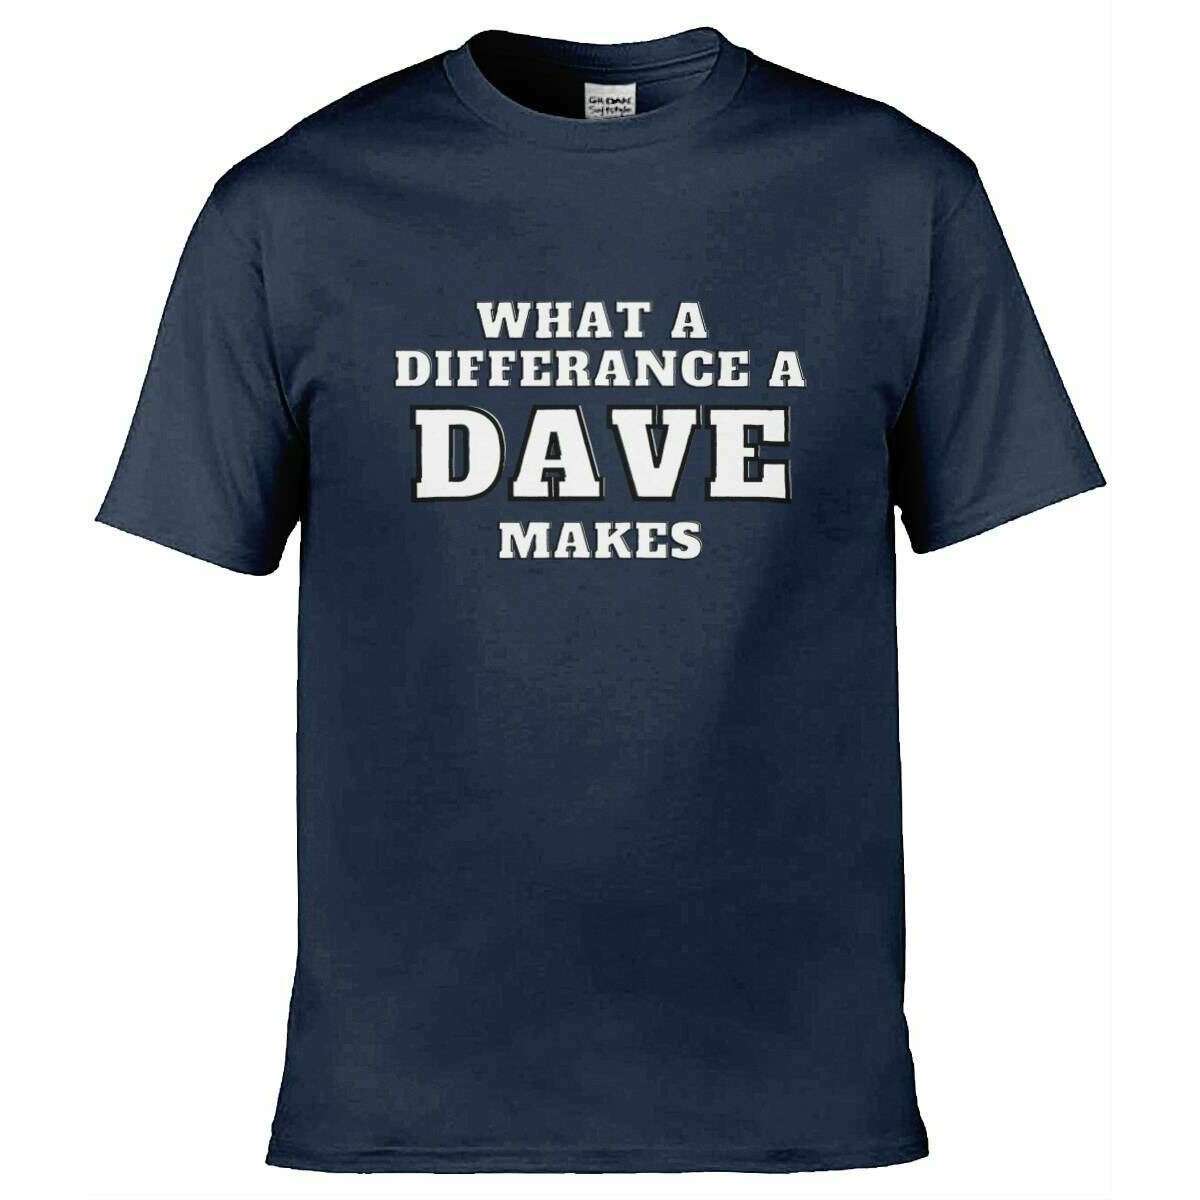 Teemarkable! What A Difference a Dave Makes T-Shirt